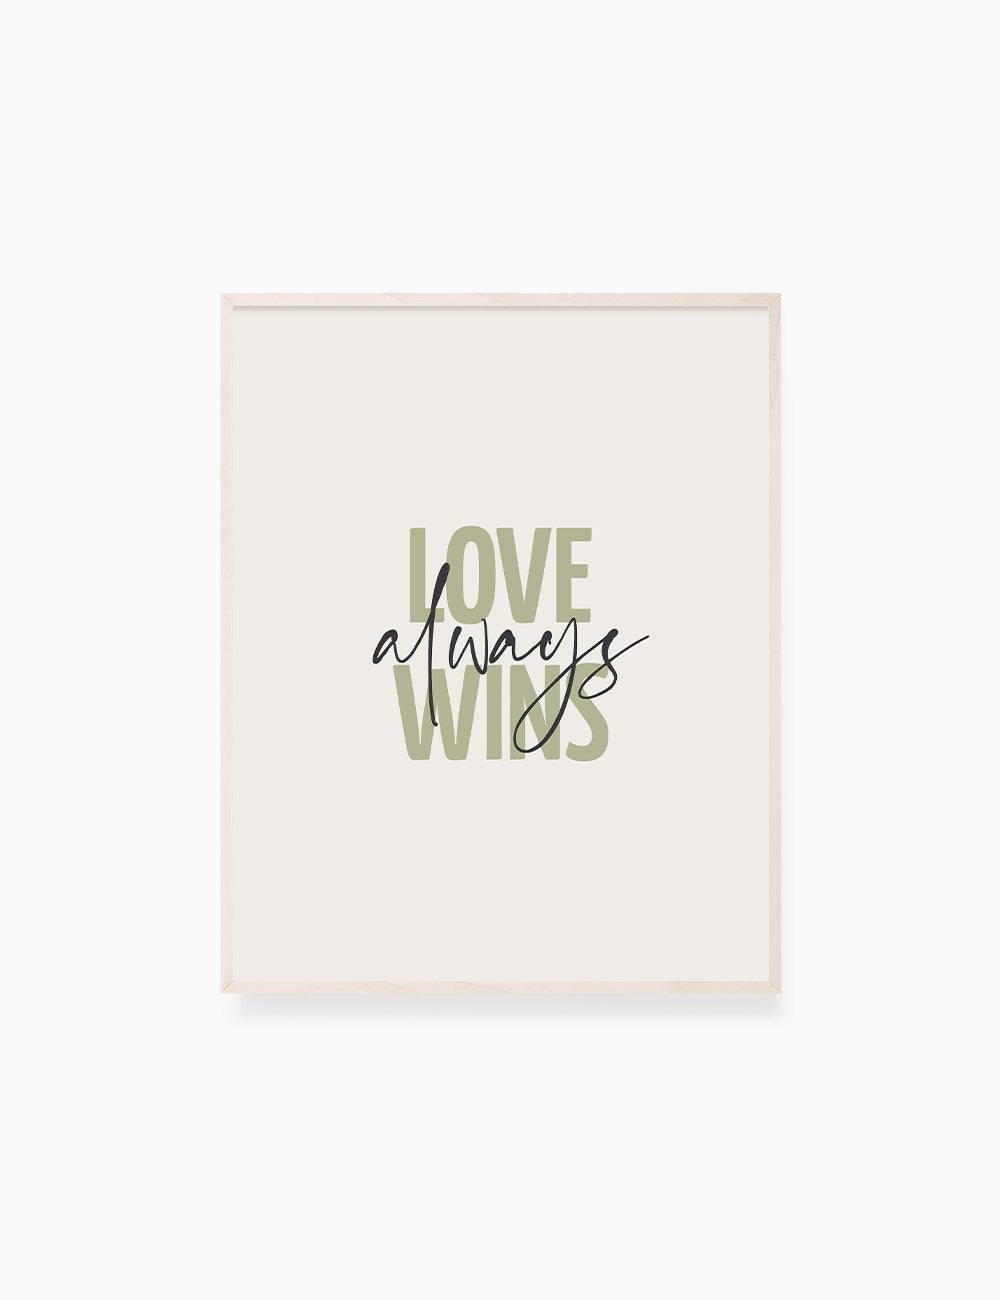 LOVE ALWAYS WINS. Green. Love quote. Romantic words. Printable Wall Art Quote. - PAPER MOON Art & Design